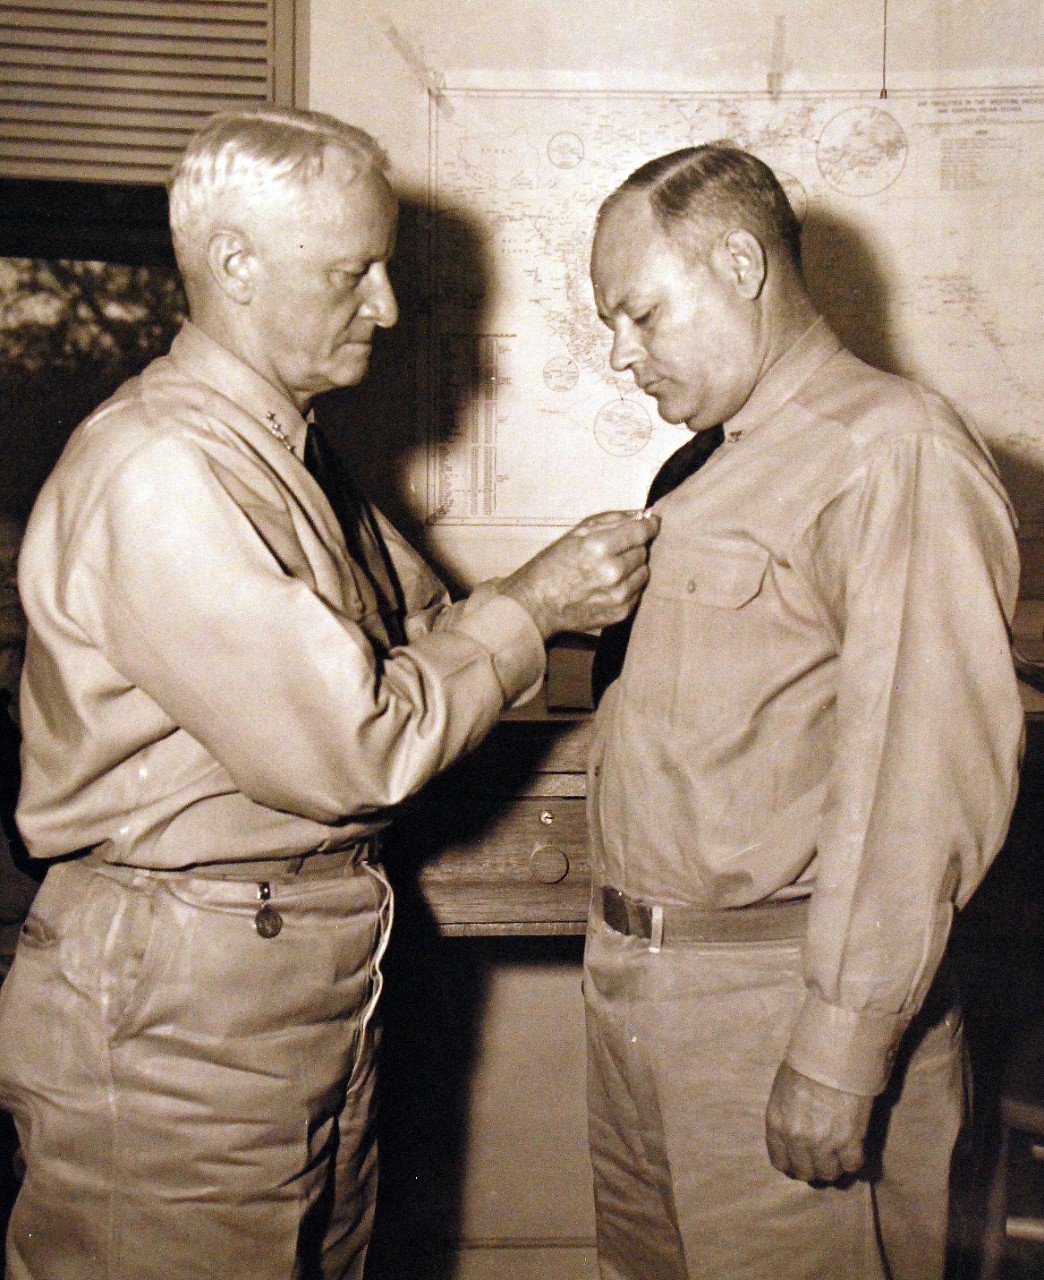 80-G-207864:   Admiral Chester W. Nimitz, USN, Commander-in-Chief of the U.S. Pacific Fleet, presented the Legion of Merit to Captain James M. Steele, USN, on January 8, 1944 at Pearl Harbor, Hawaii, for exceptionally meritorious conduct in performance of outstanding service to the Government of the United States as Salvage Superintendent following the Japanese Attack on Pearl Harbor, Hawaii, December 7, 1941.  Photograph released January 8, 1944.  U.S. Navy Photograph